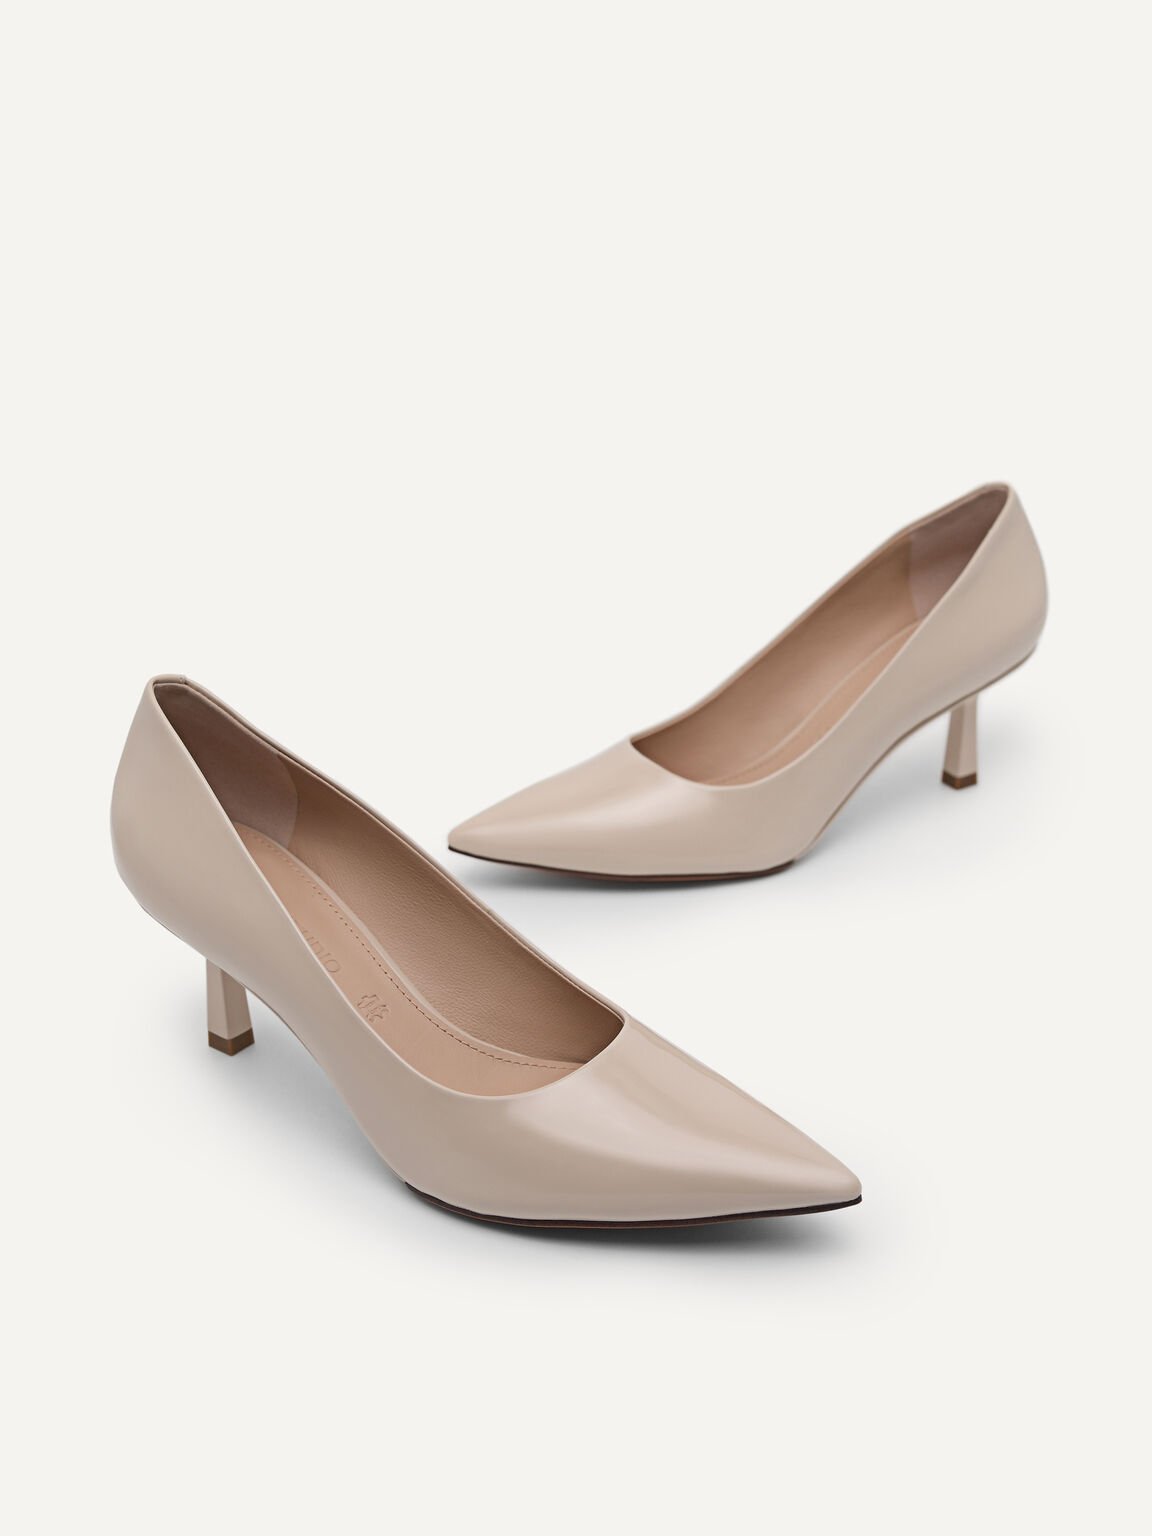 Patent Leather Pointed Pumps, Nude